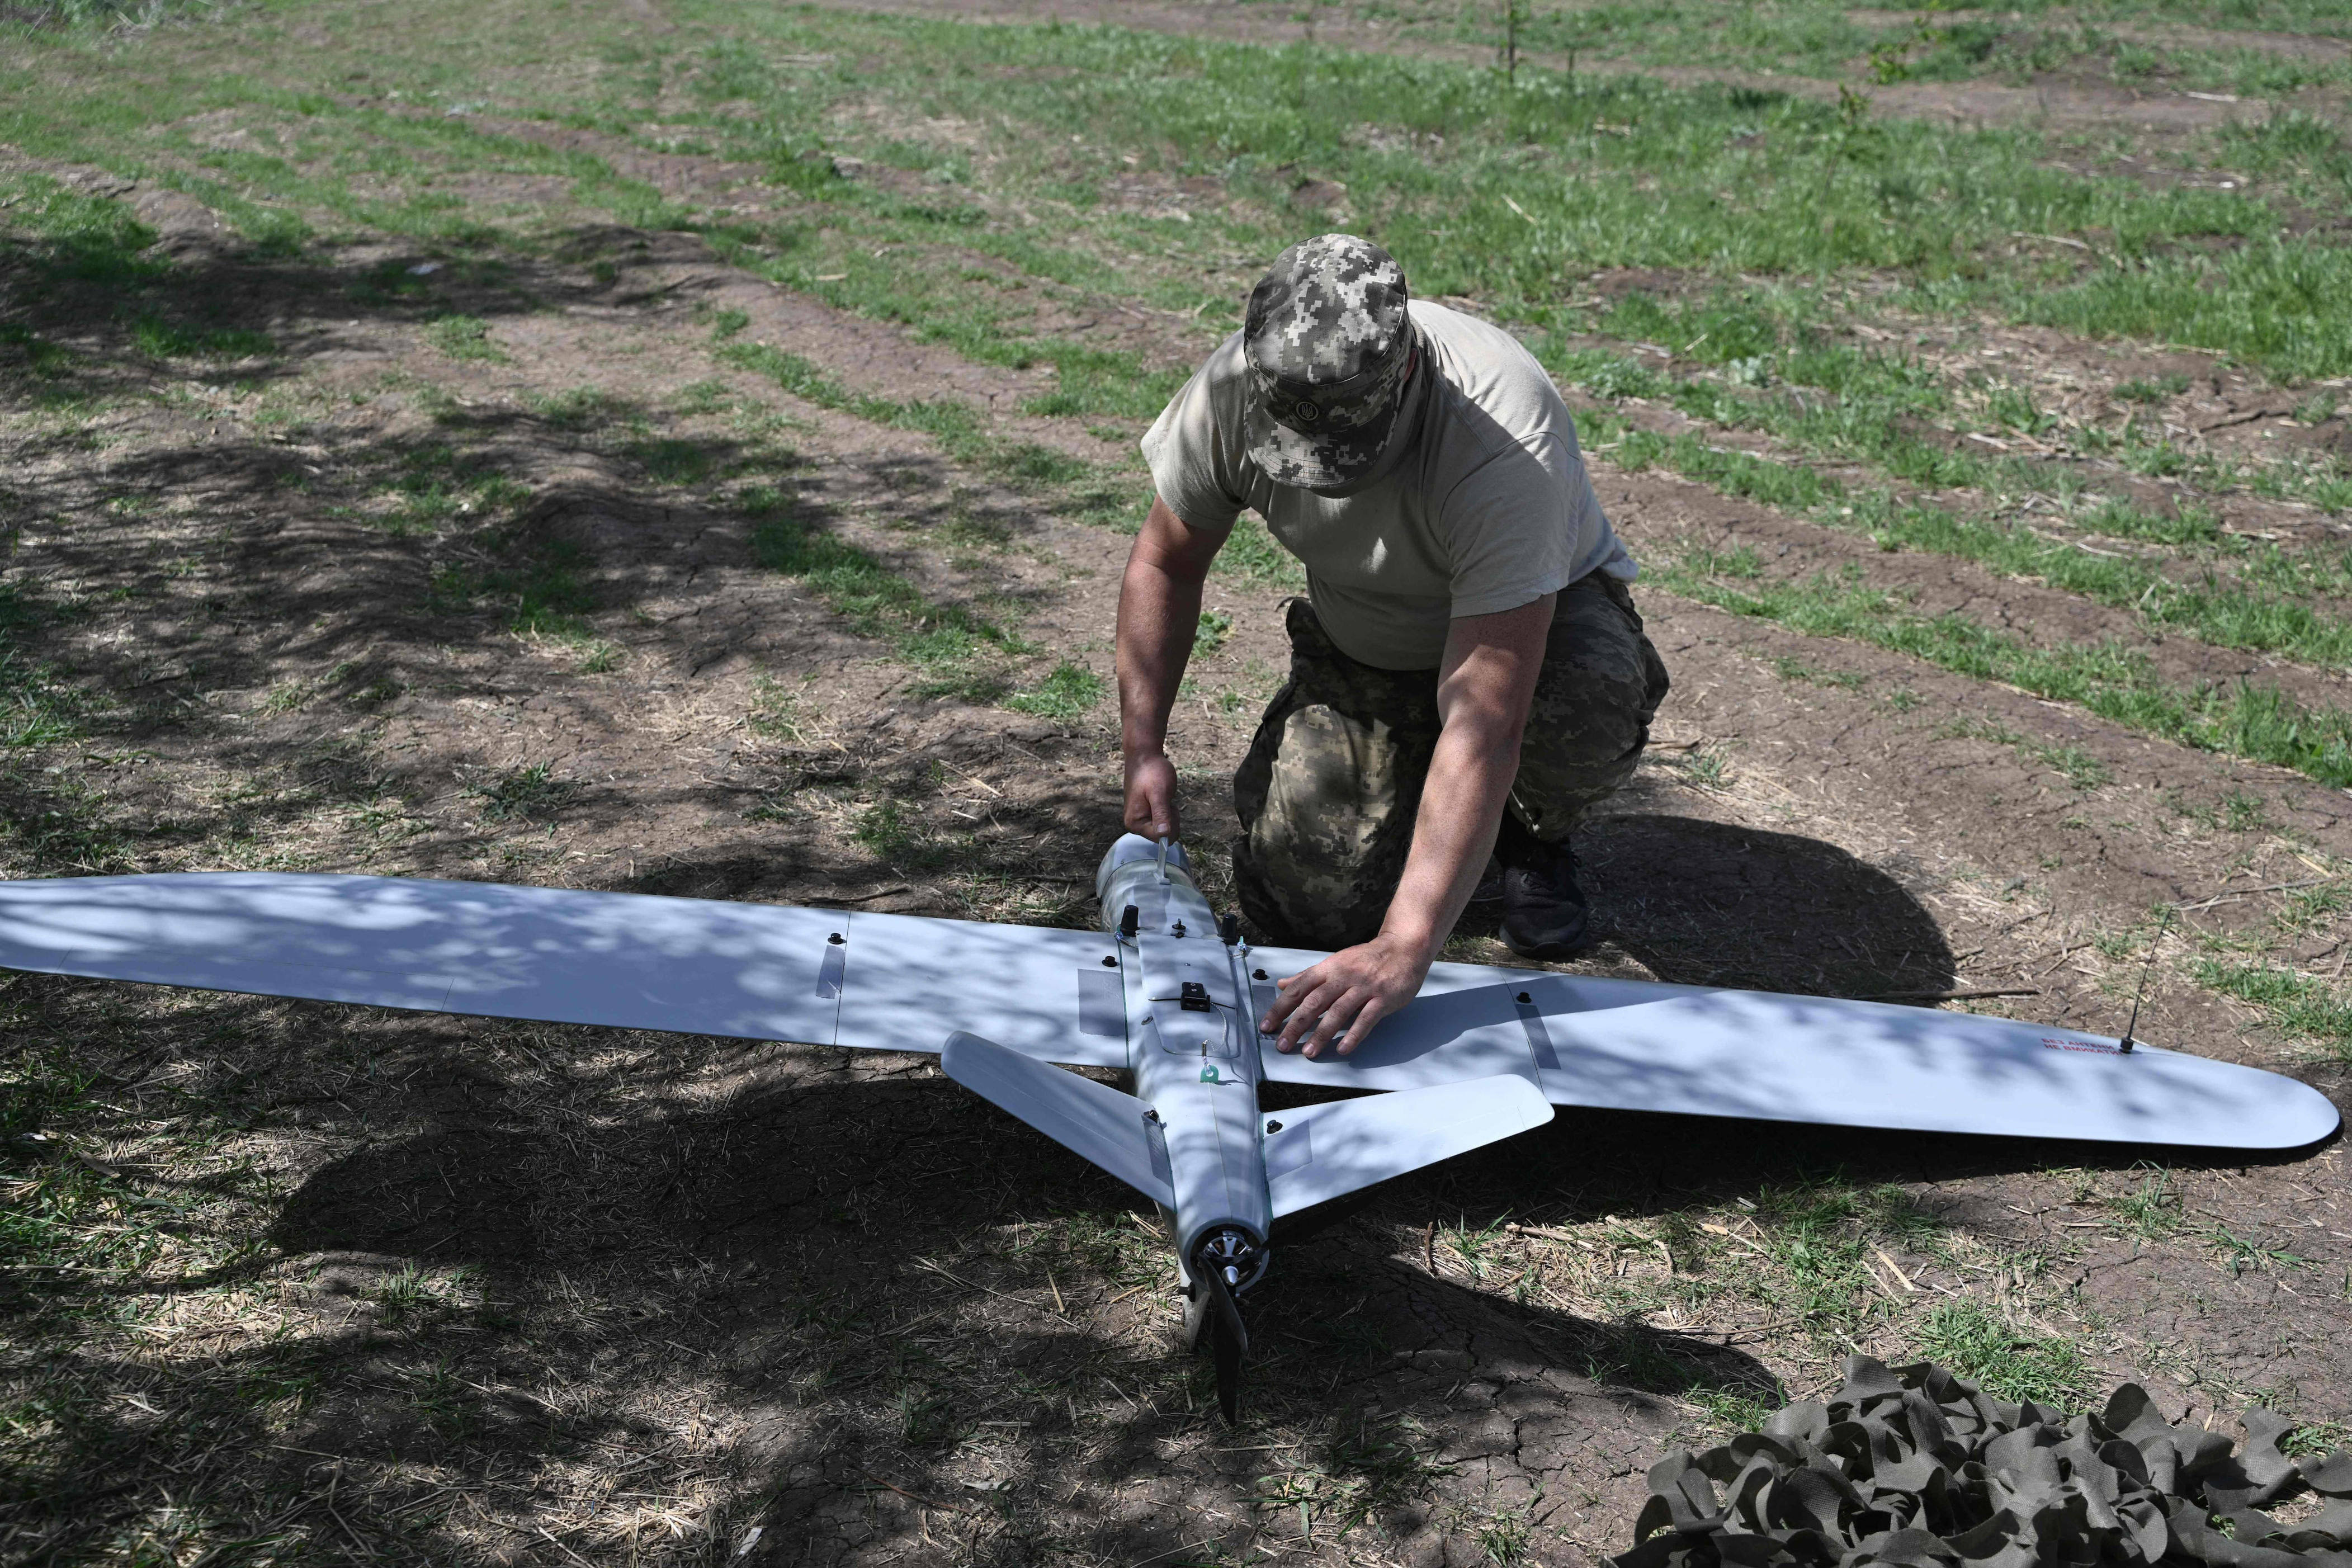 russia says it destroyed 17 drones launched by ukraine